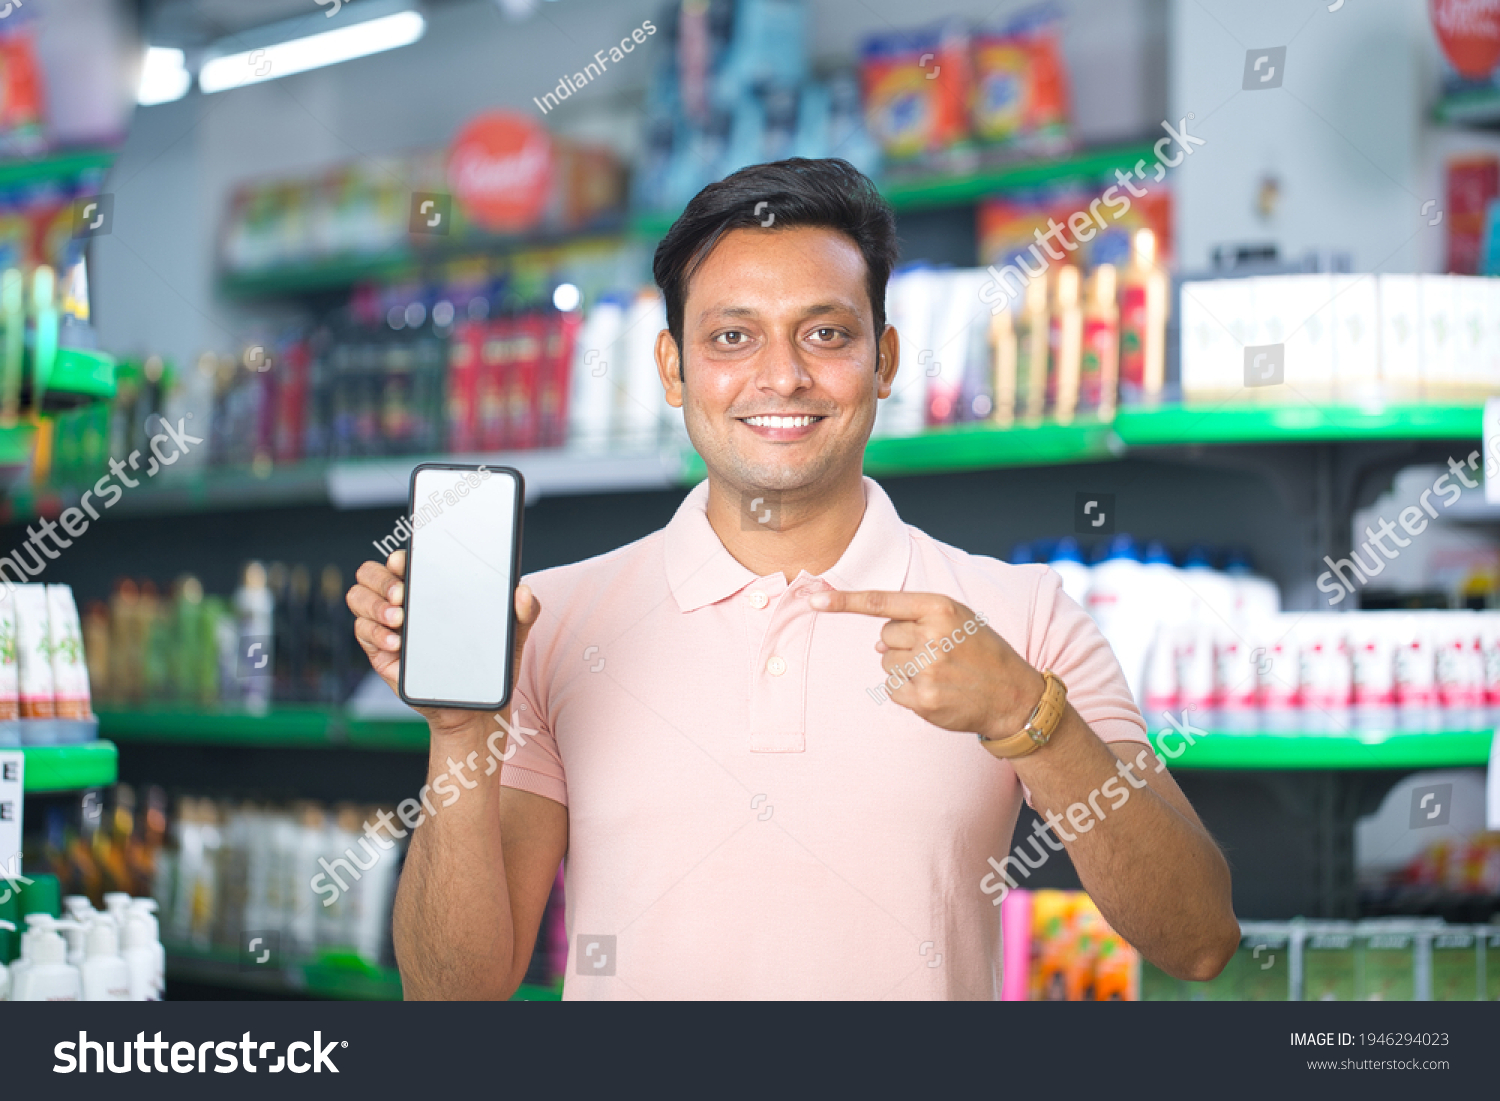 Man pointing at blank mobile phone screen in supermarket #1946294023